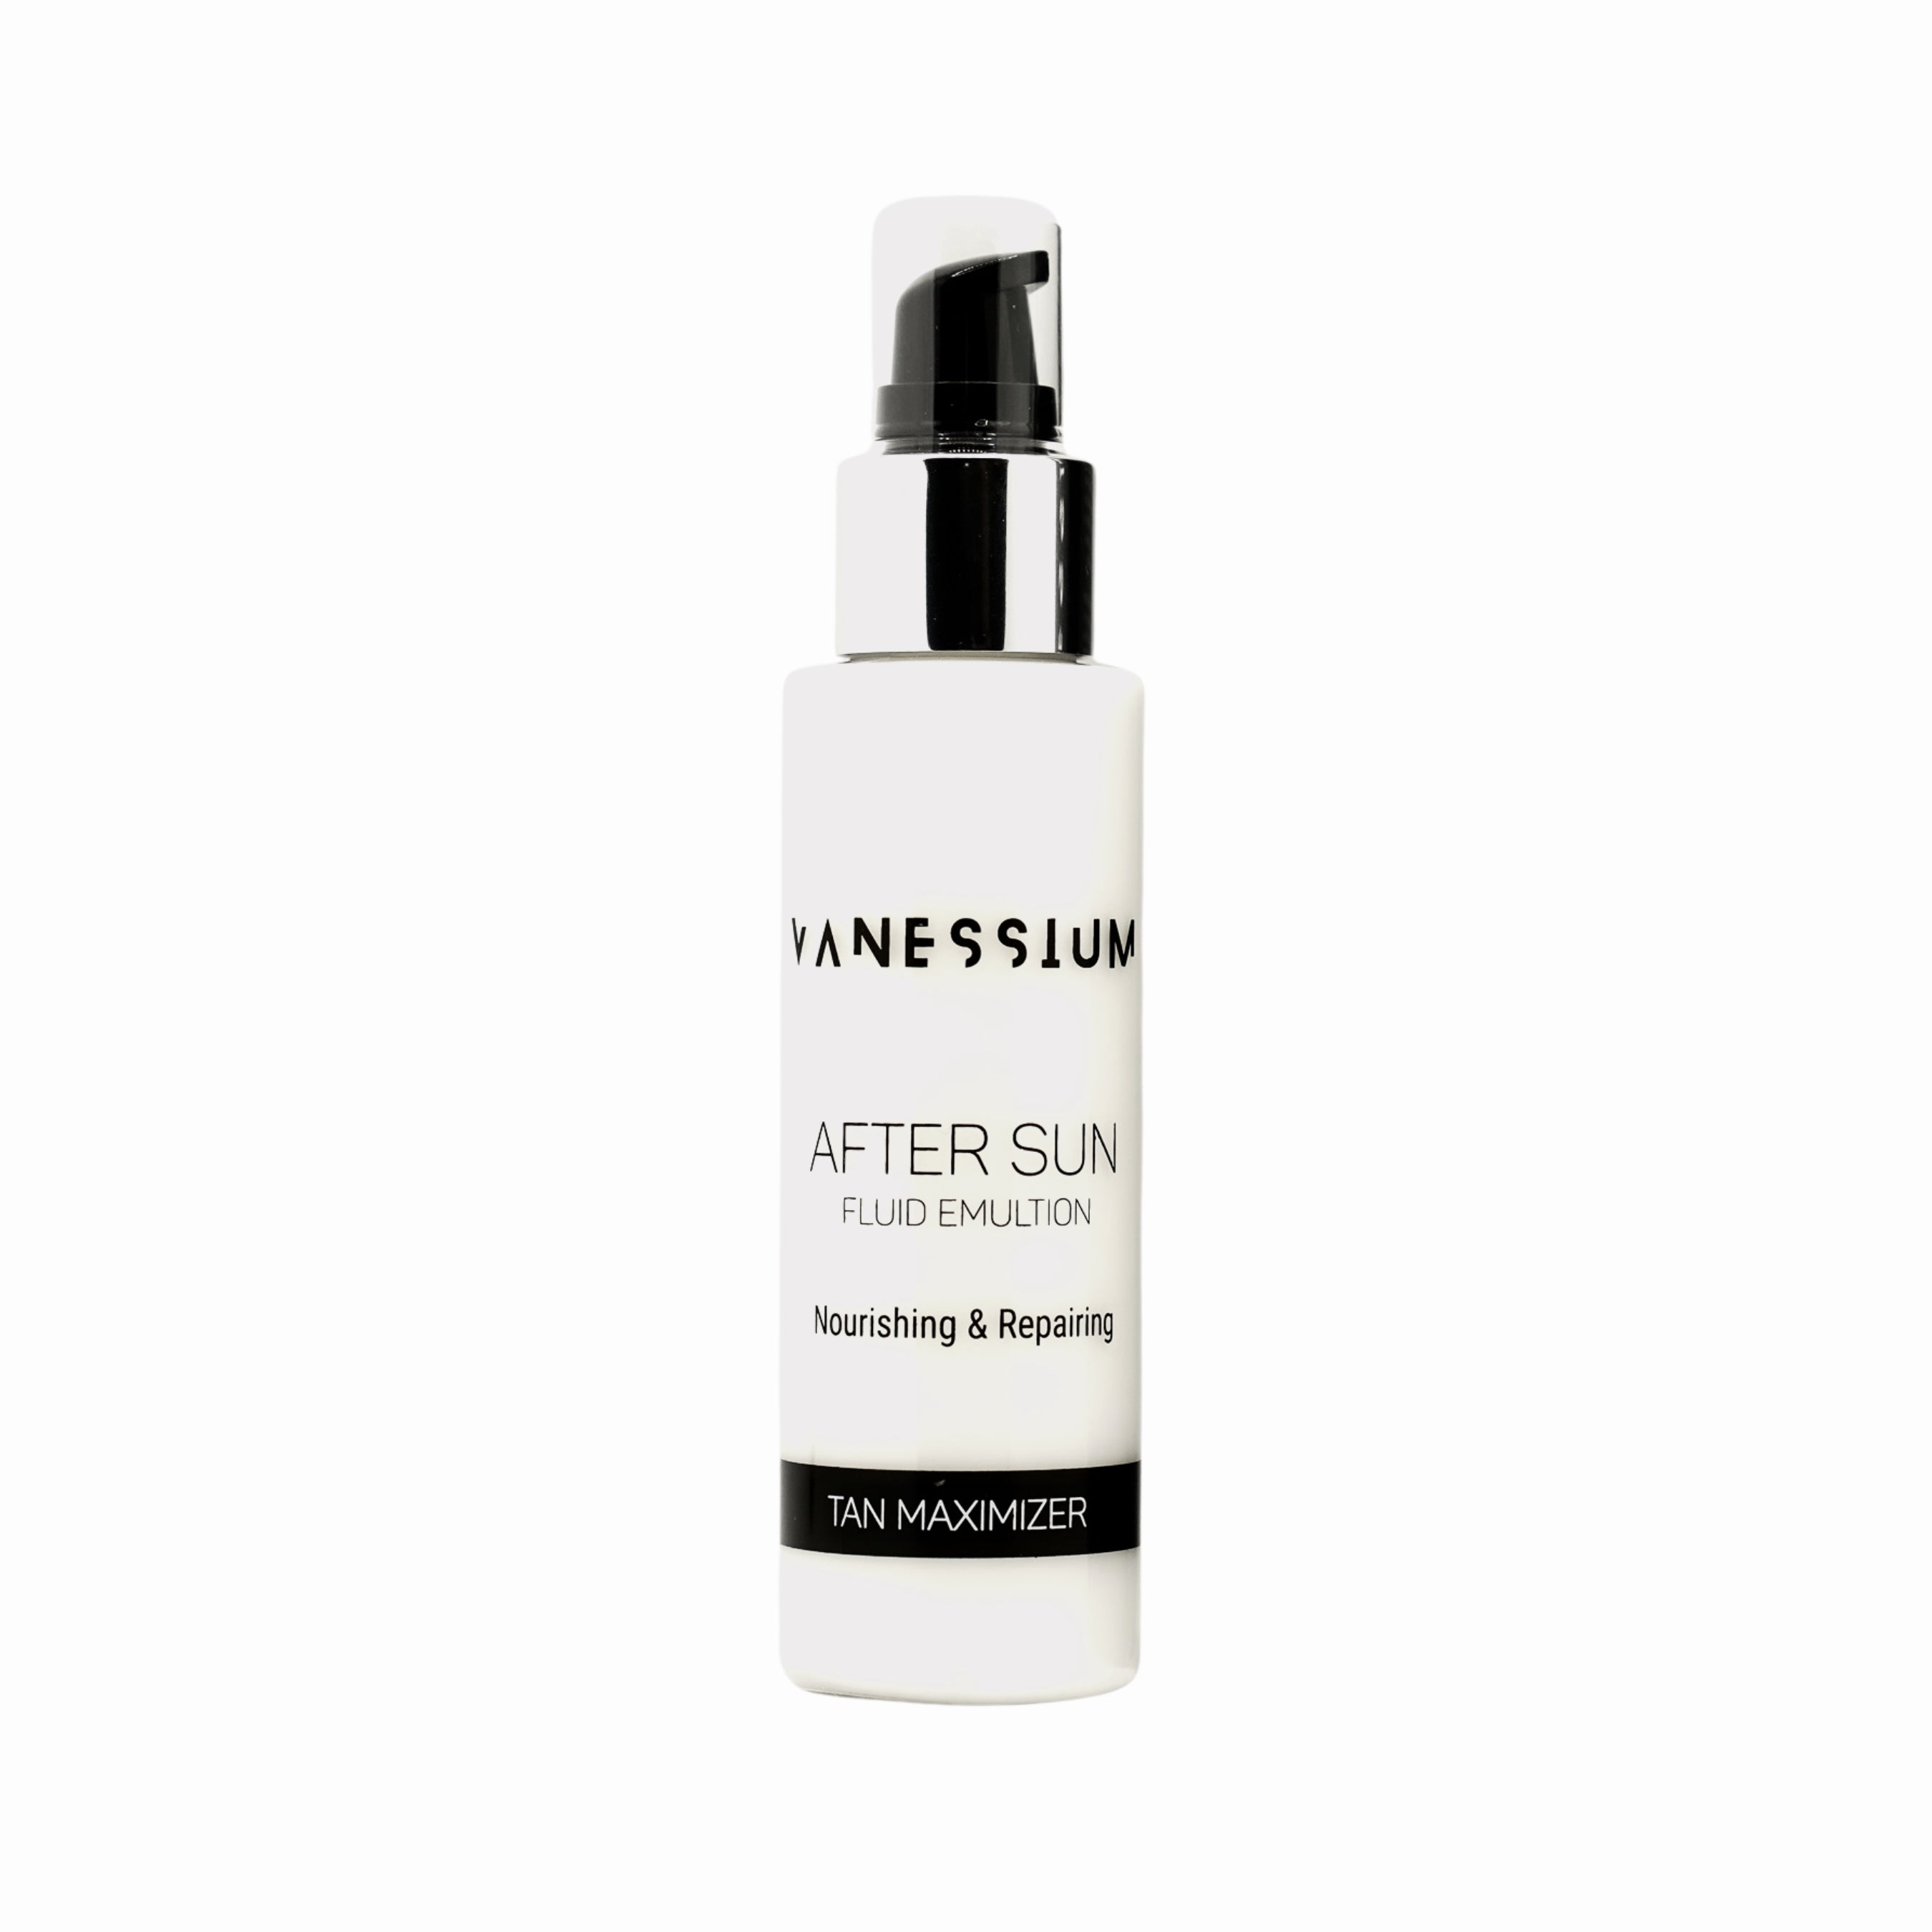 Aftersun Lotion